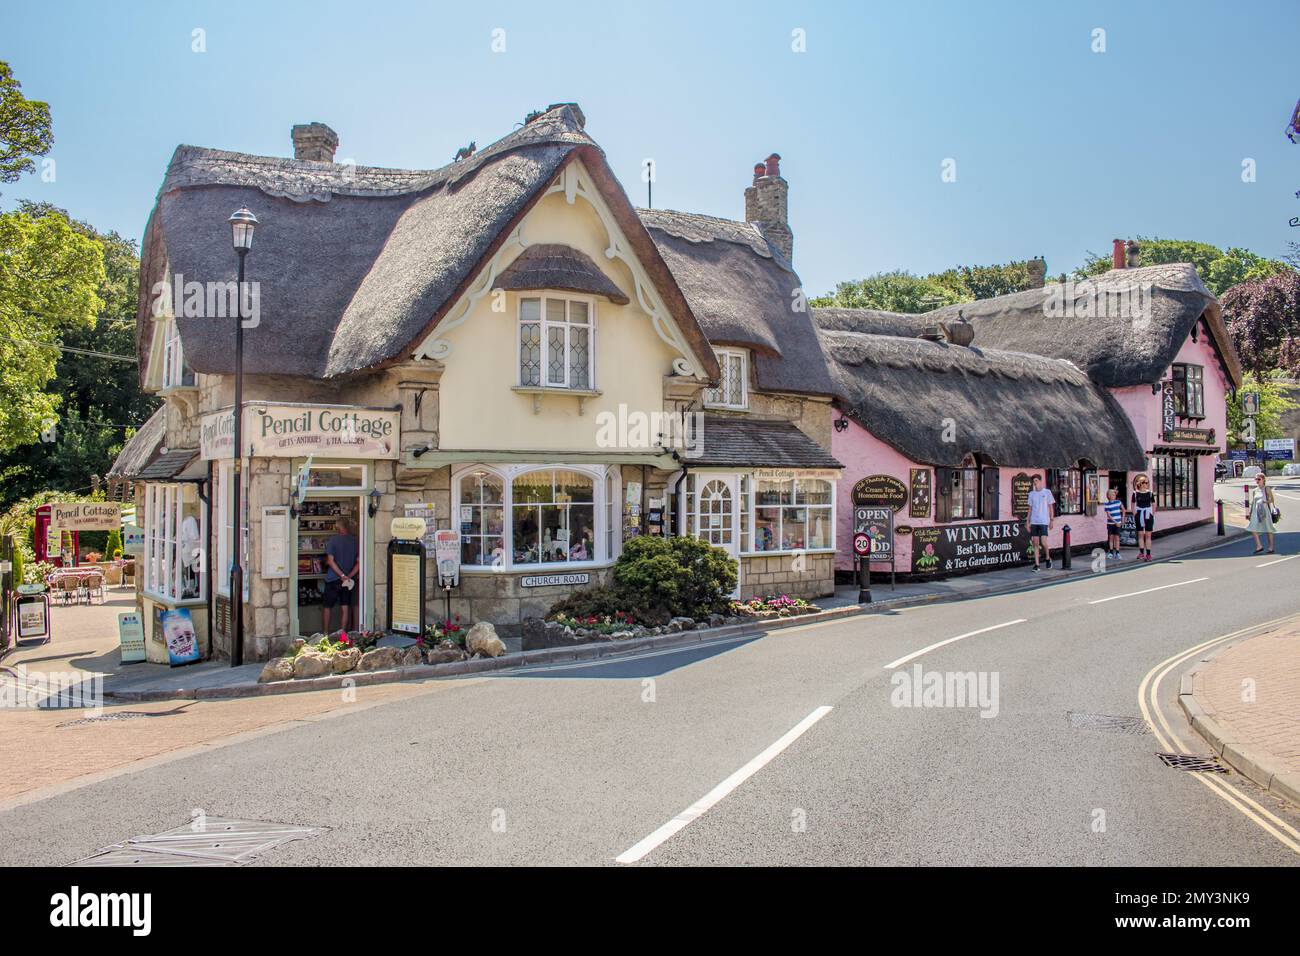 Shanklin is a traditional seaside town located on the south-east coast of the Isle of Wight. Young or old Shanklin has plenty to offer, with long sand Stock Photo